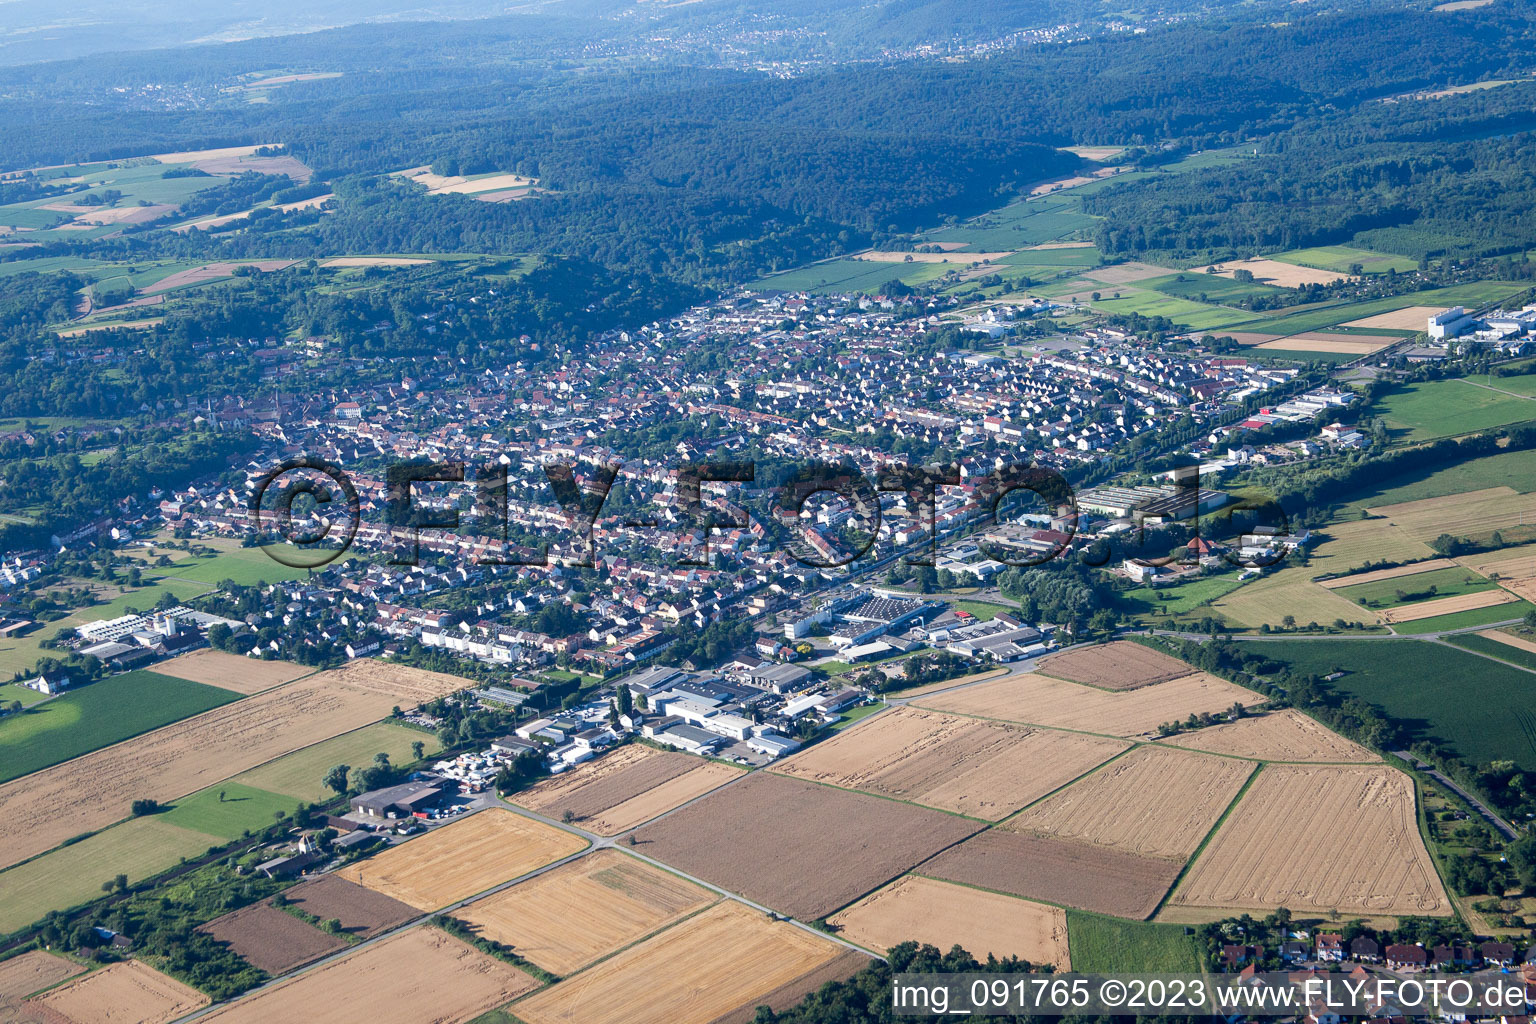 Weingarten in the state Baden-Wuerttemberg, Germany from the plane